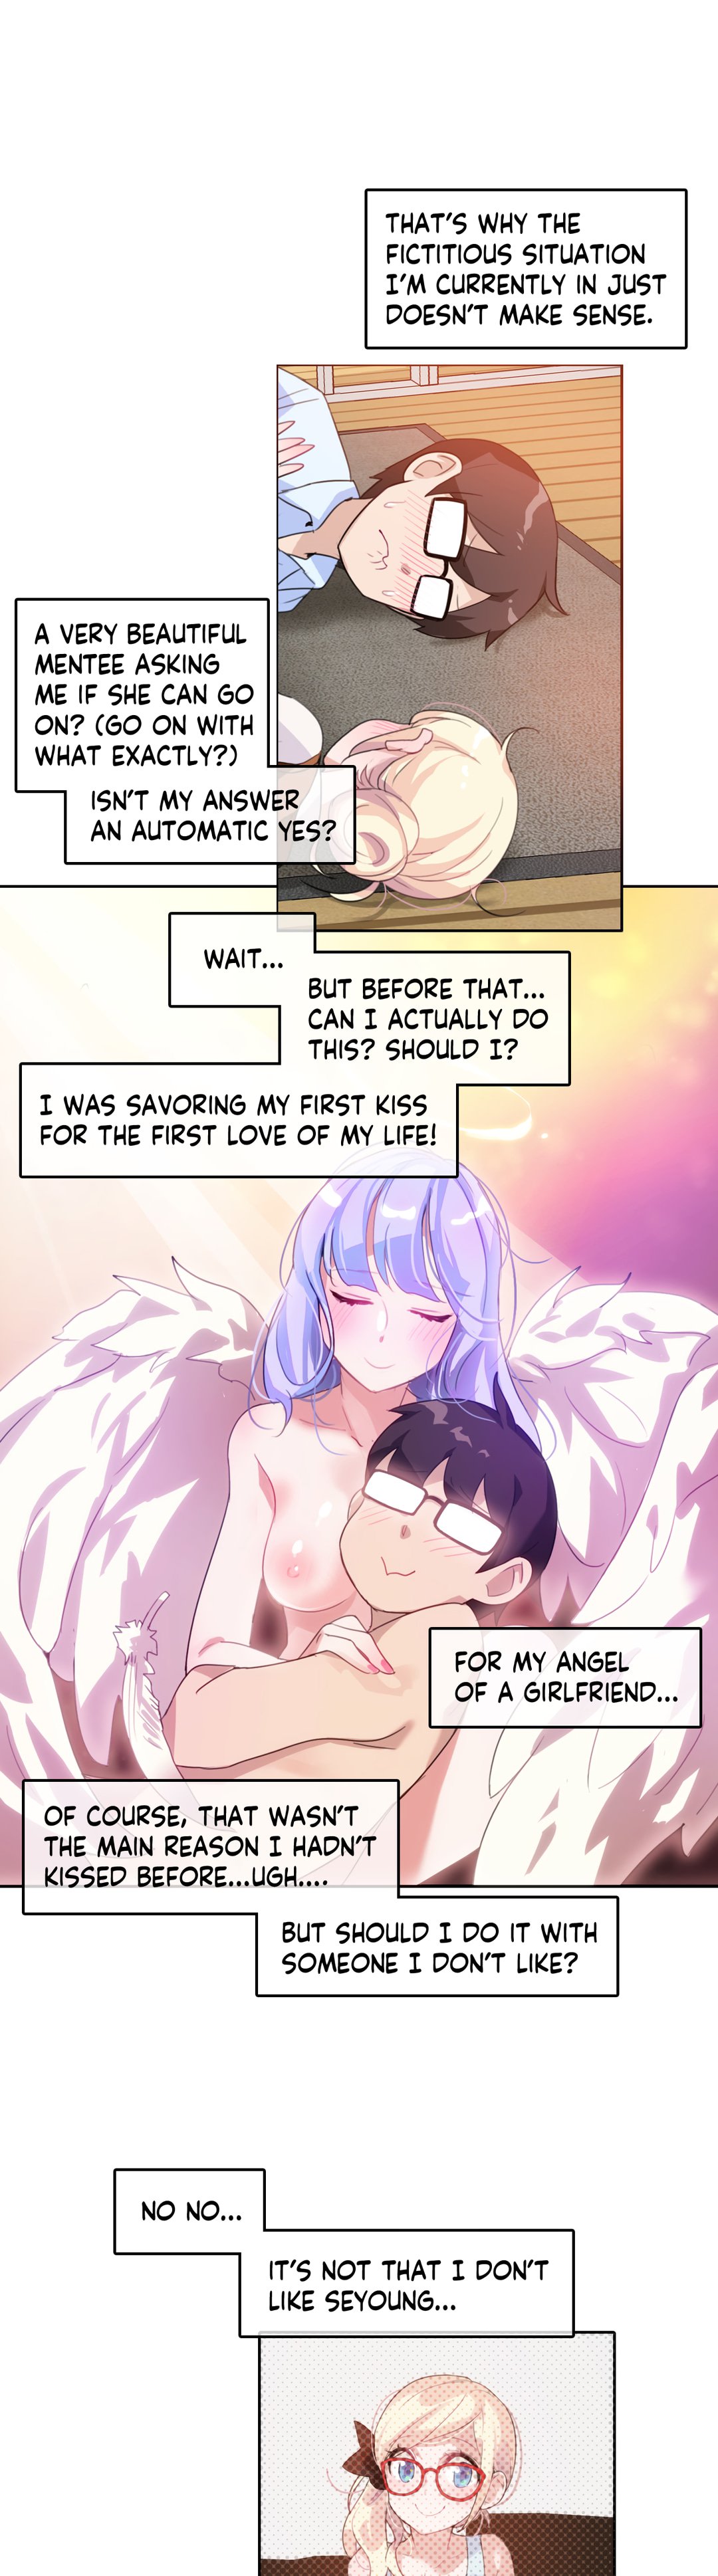 A Pervert's Daily Life Ch.10